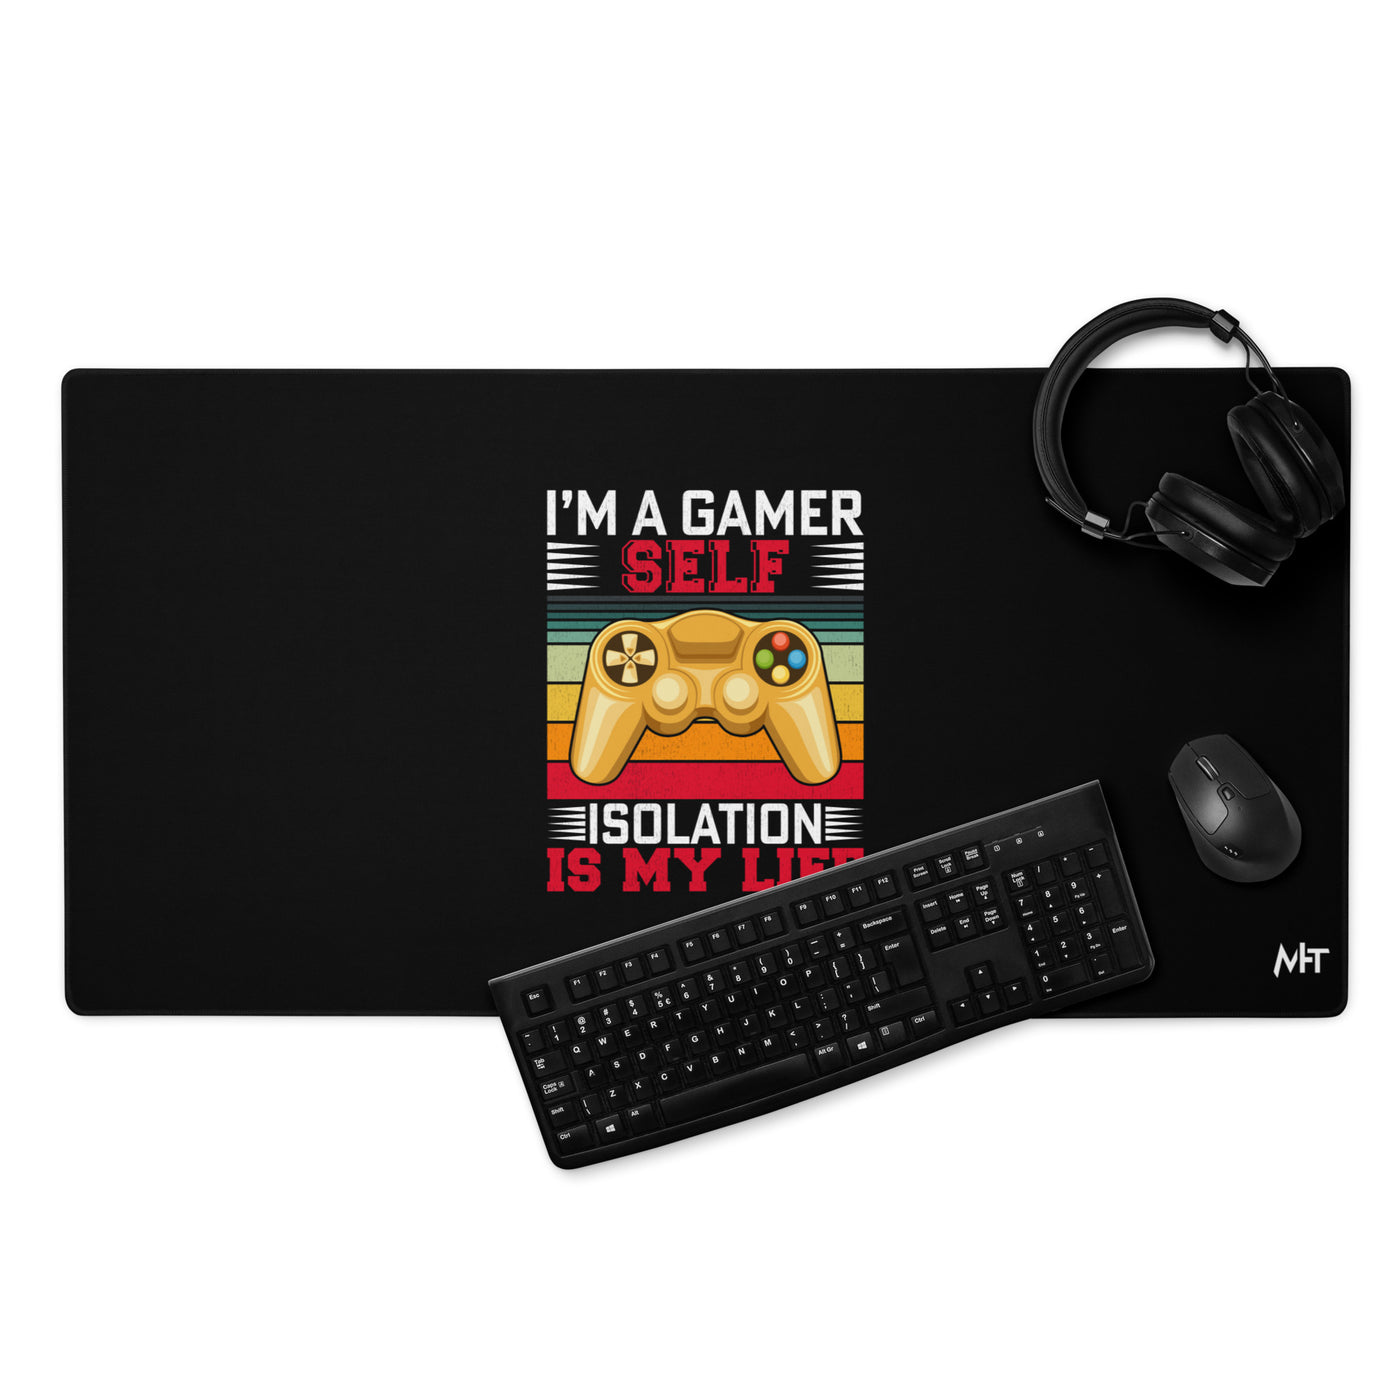 I am a Gamer; Self-isolation is my life - Desk Mat